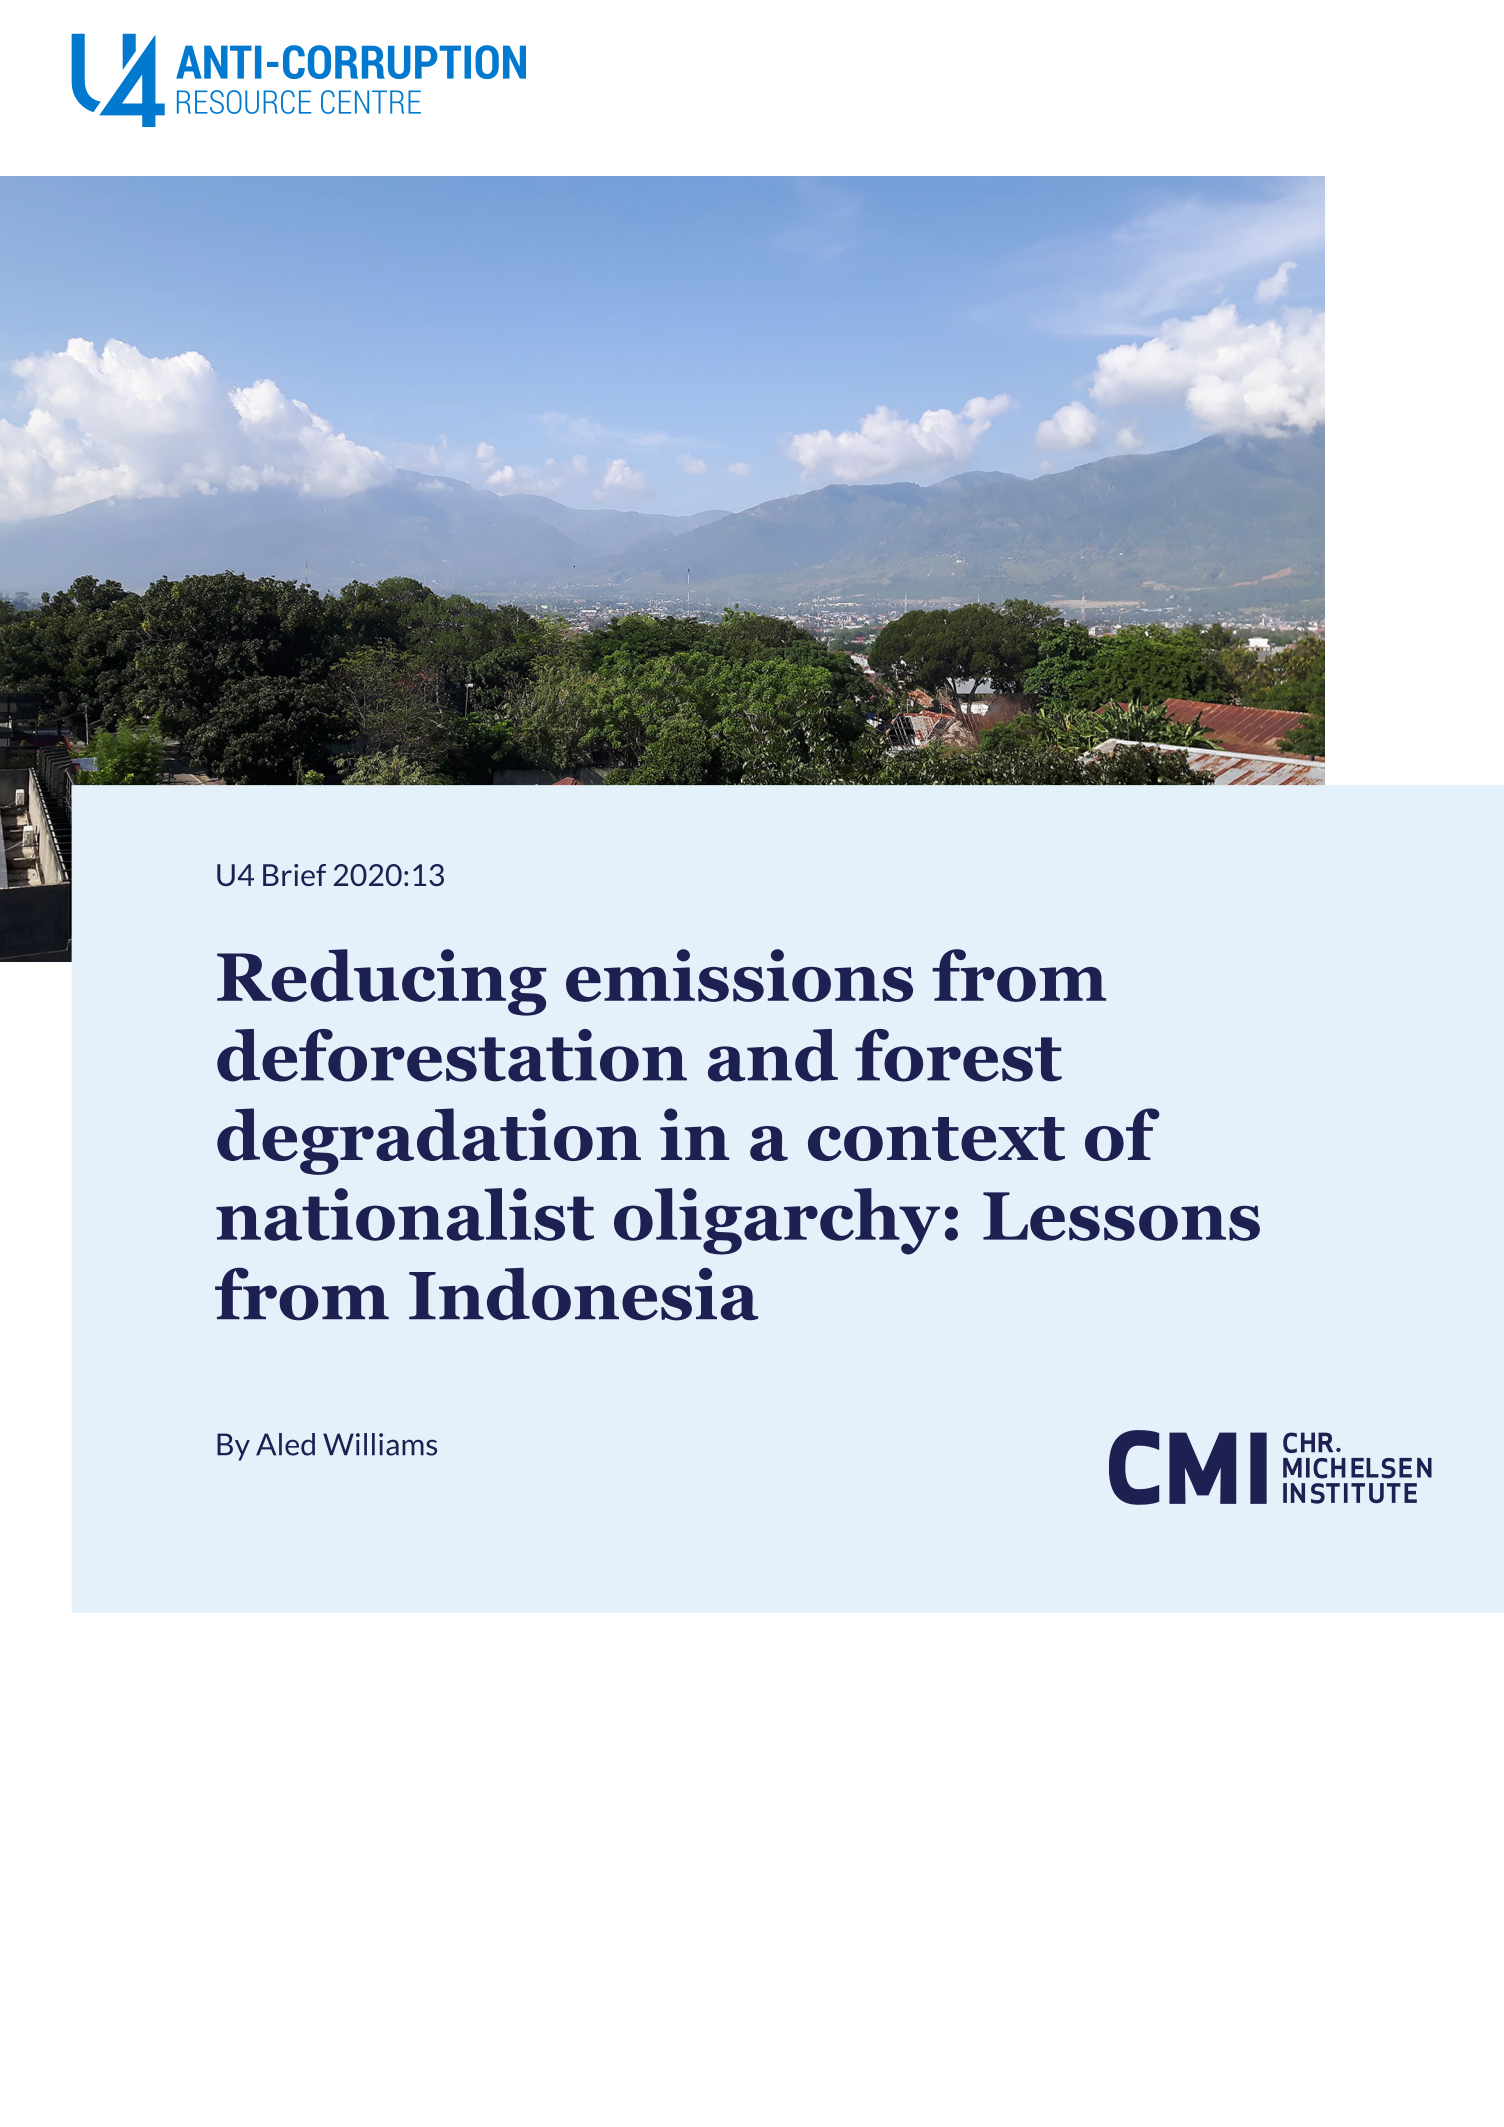 Reducing emissions from deforestation and forest degradation in a context of nationalist oligarchy: Lessons from Indonesia